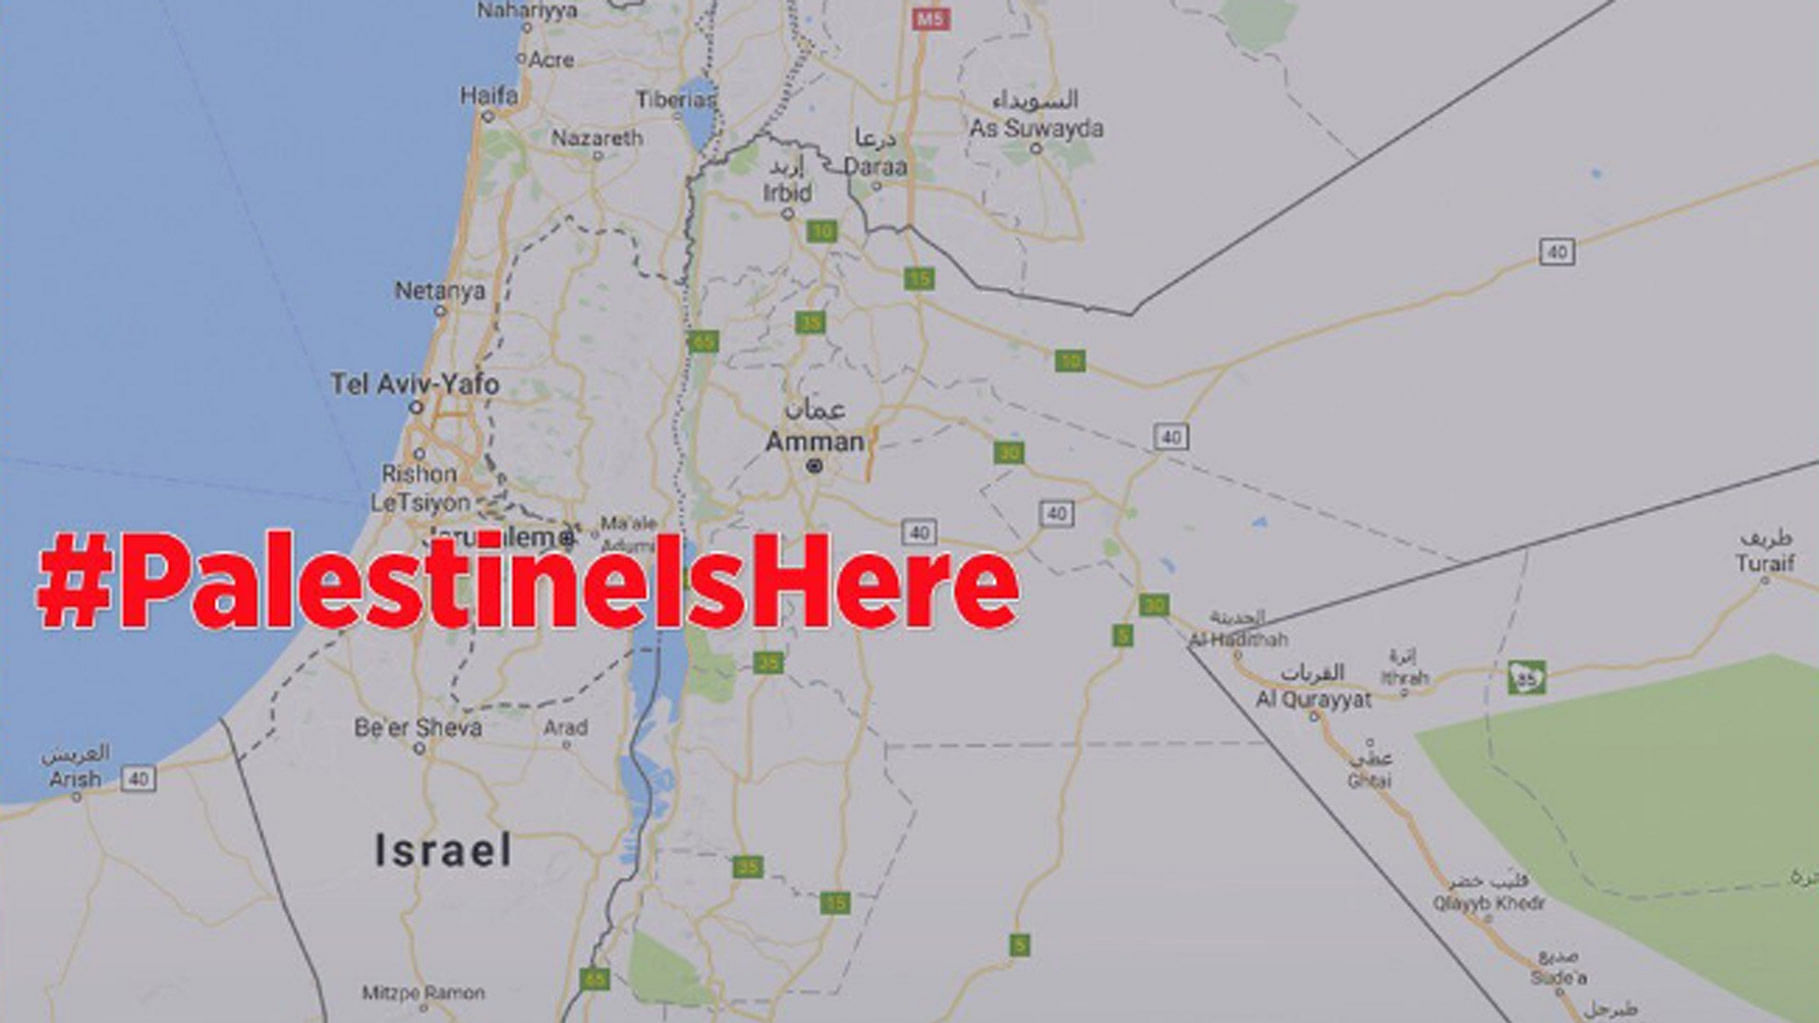 People have expressed outrage over Palestine ‘disappearing’ from Google Maps. (Photo Courtesy: Twitter/ <a href="https://twitter.com/tugvaankara">Tugva Ankara)</a>